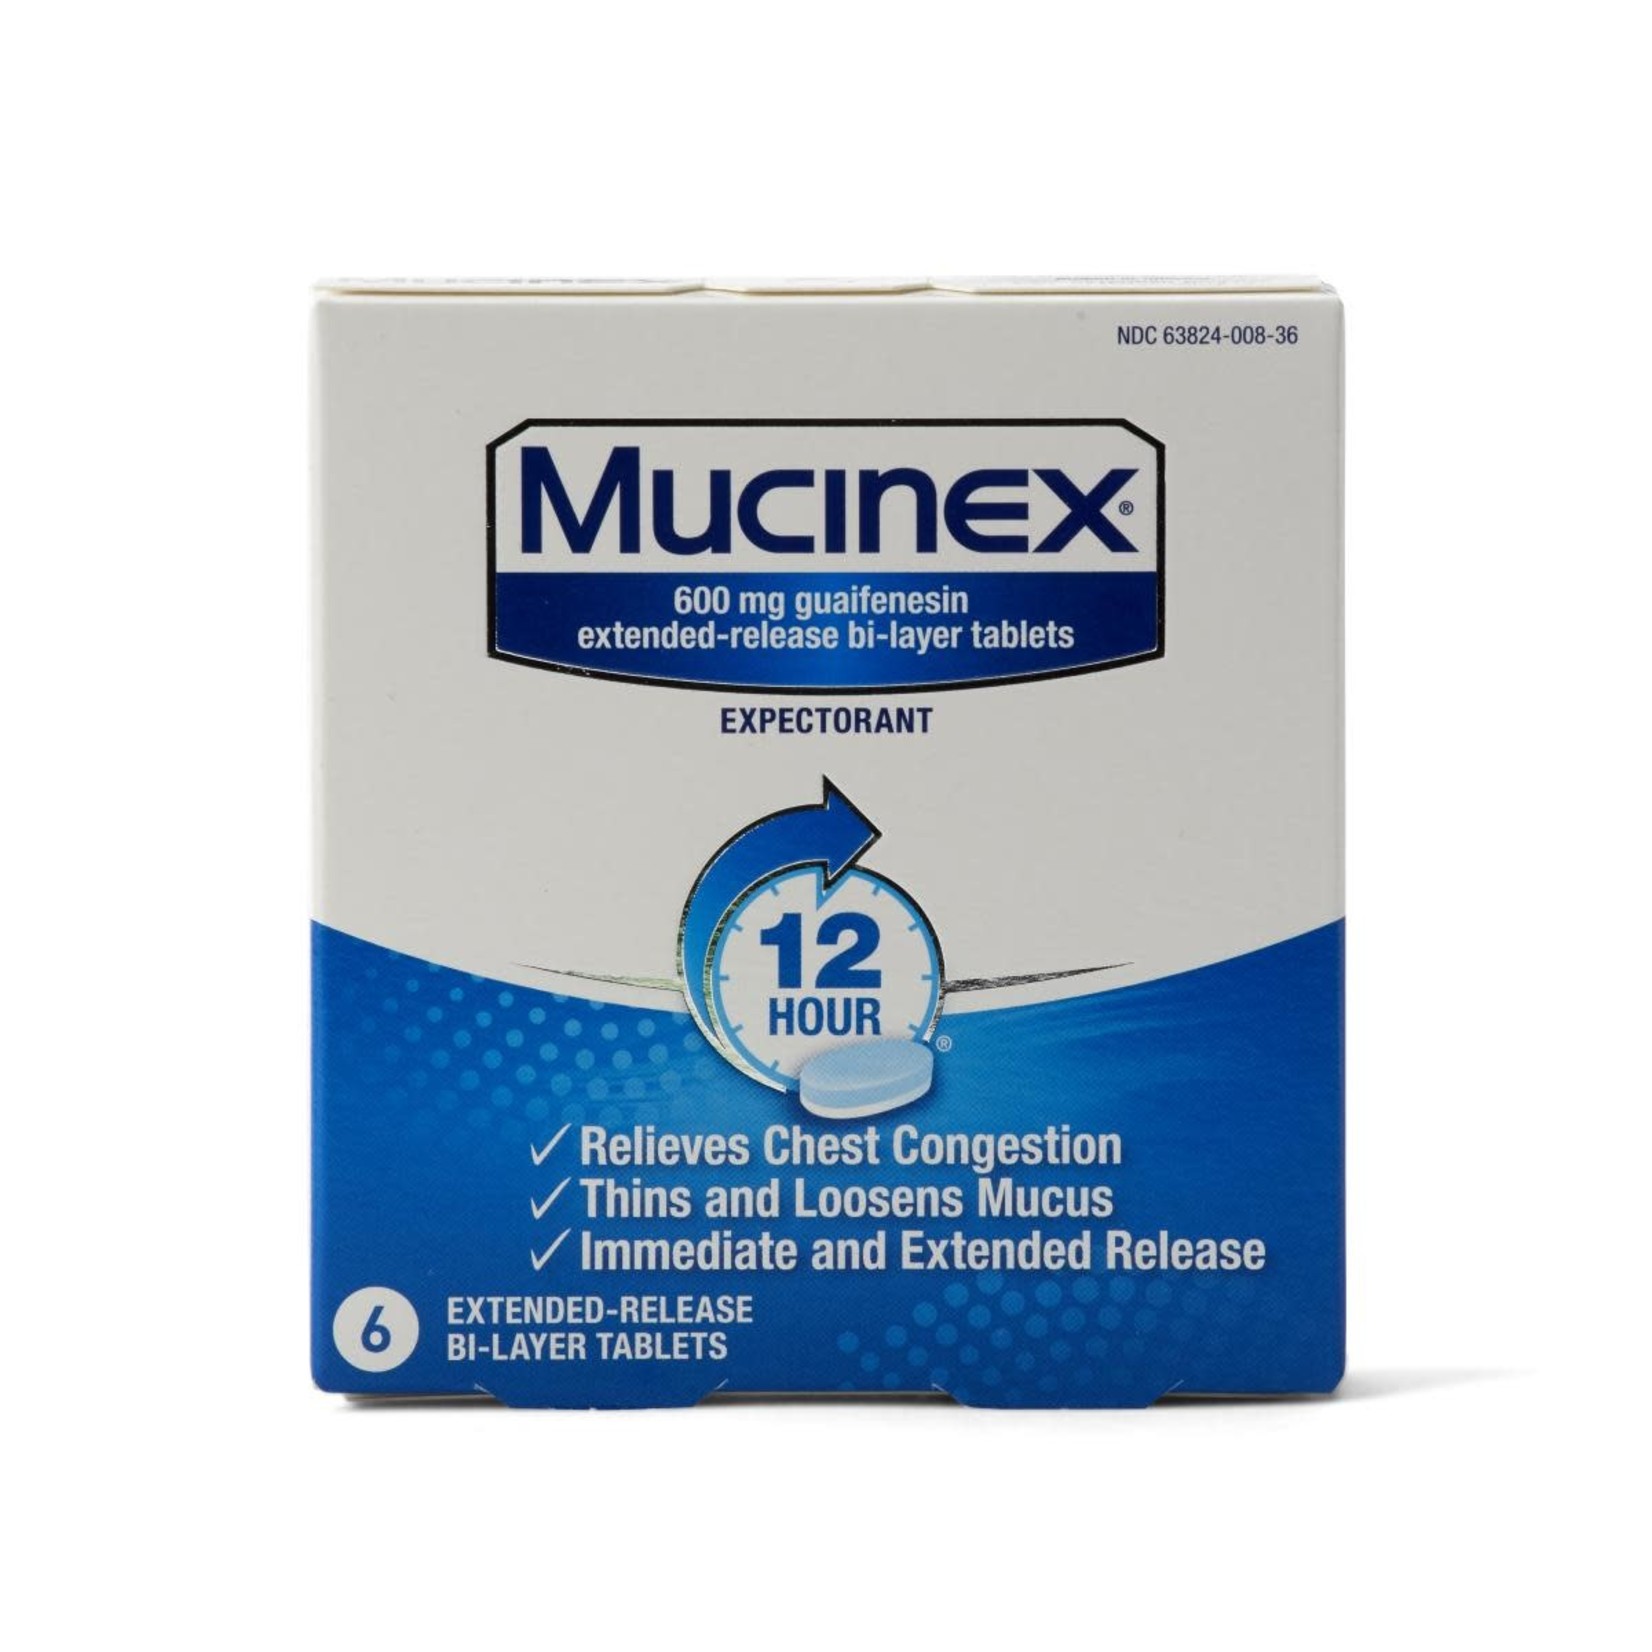 Mucinex Mucinex extended release 600mg 6ct.